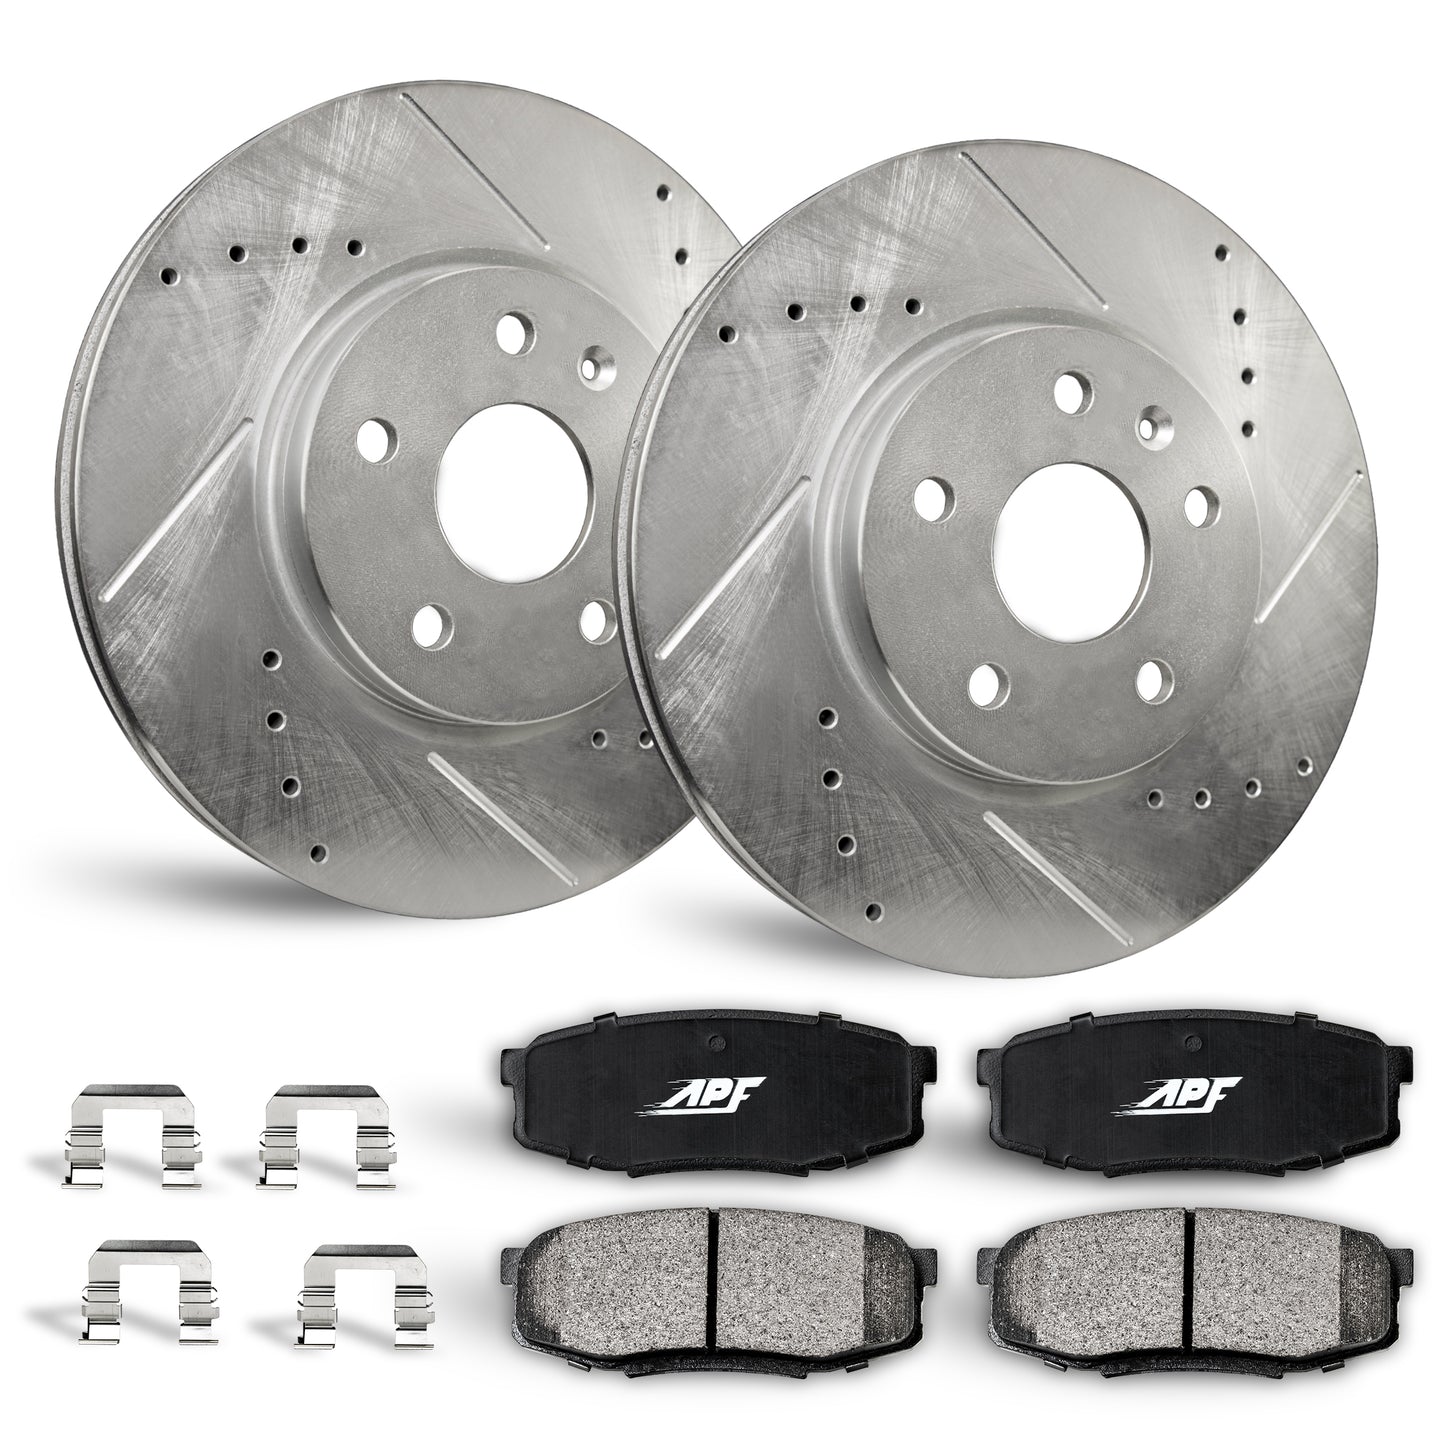 APF Rear Brake Kit compatible with Nissan 350Z 2003-2005 | Zinc Drilled Slotted Rotors with Ceramic Carbon Fiber Brake Pads